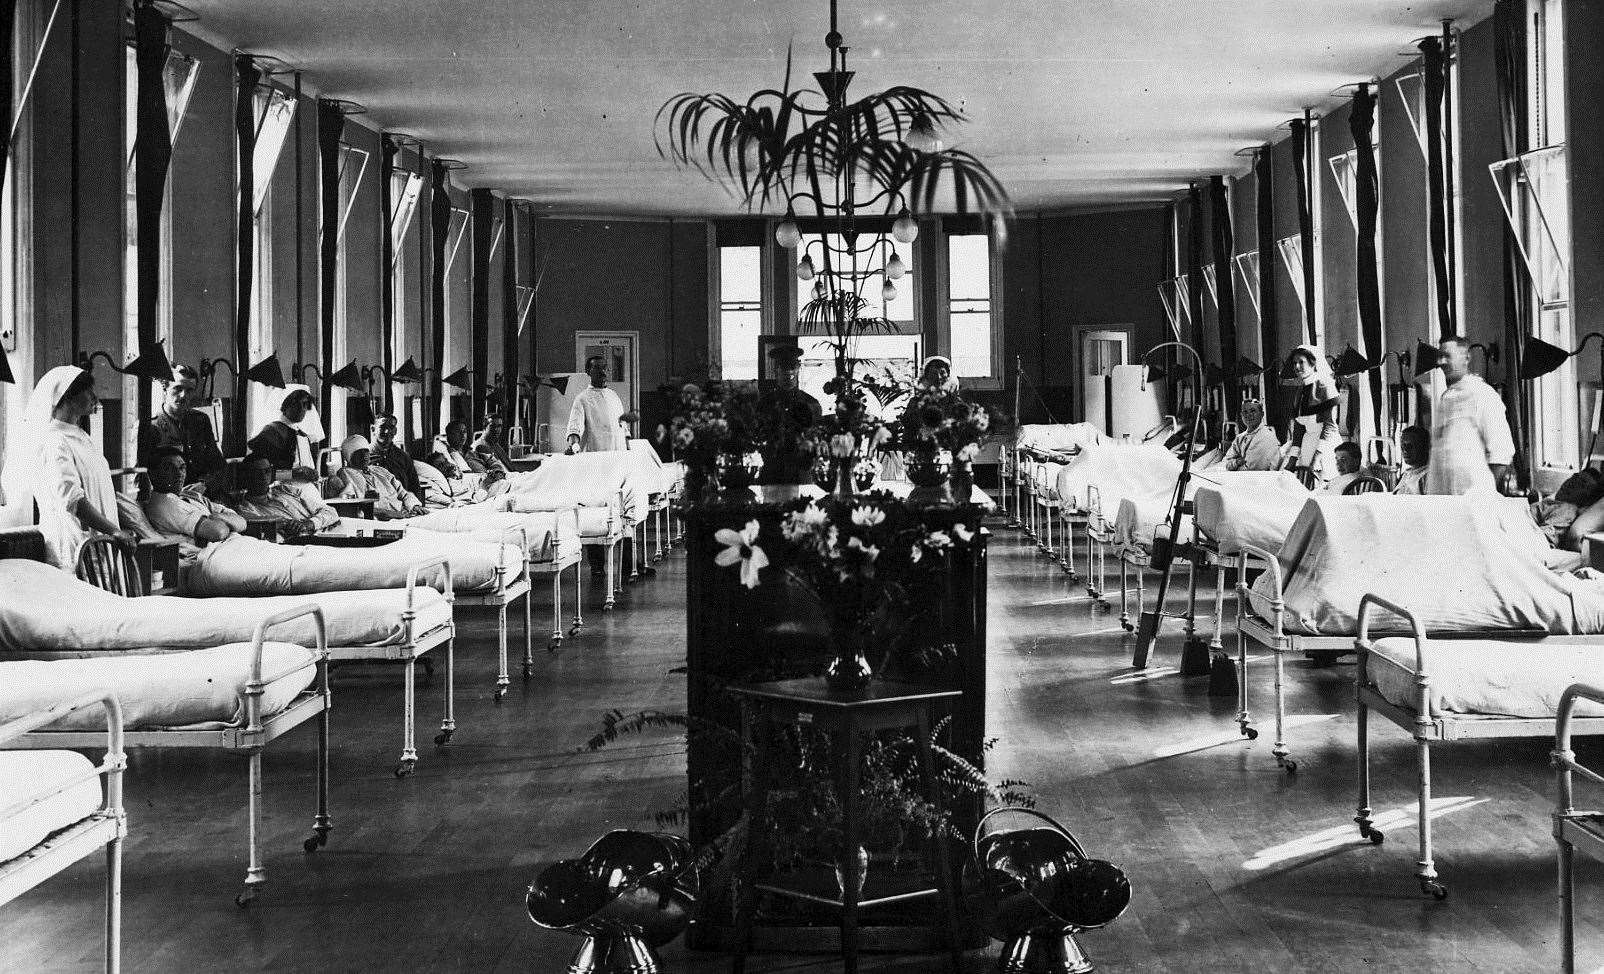 One of the wards at Fort Pitt Military Hospital Photo: MALSC Cindy O'Halloran